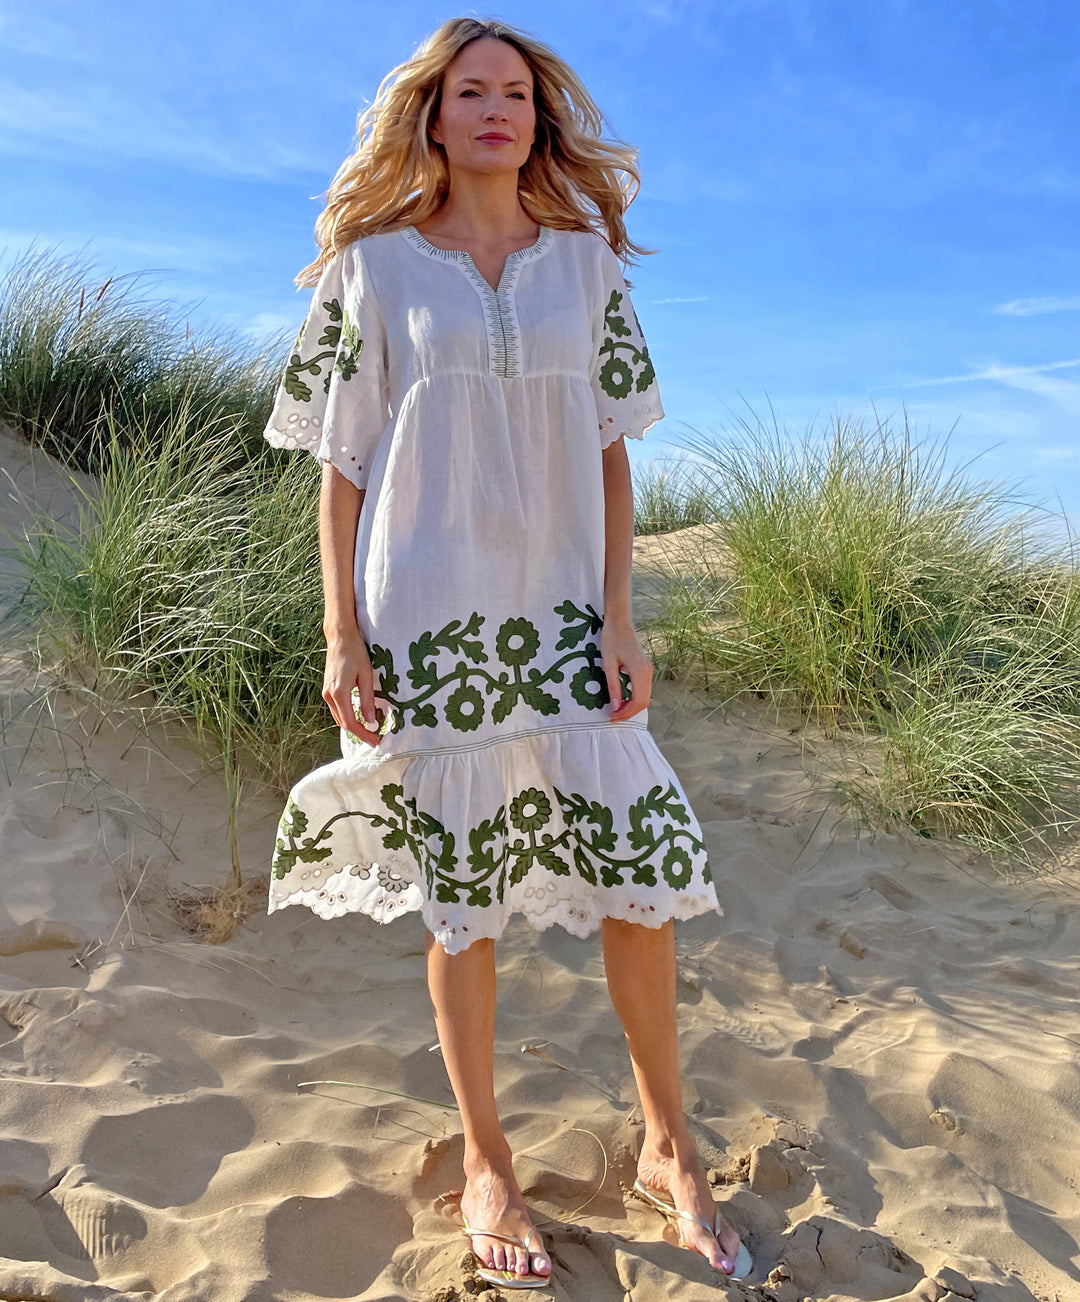 Rose and Rose l Dresses, Kaftans, Tops, Hats and Luxury Resort Wear